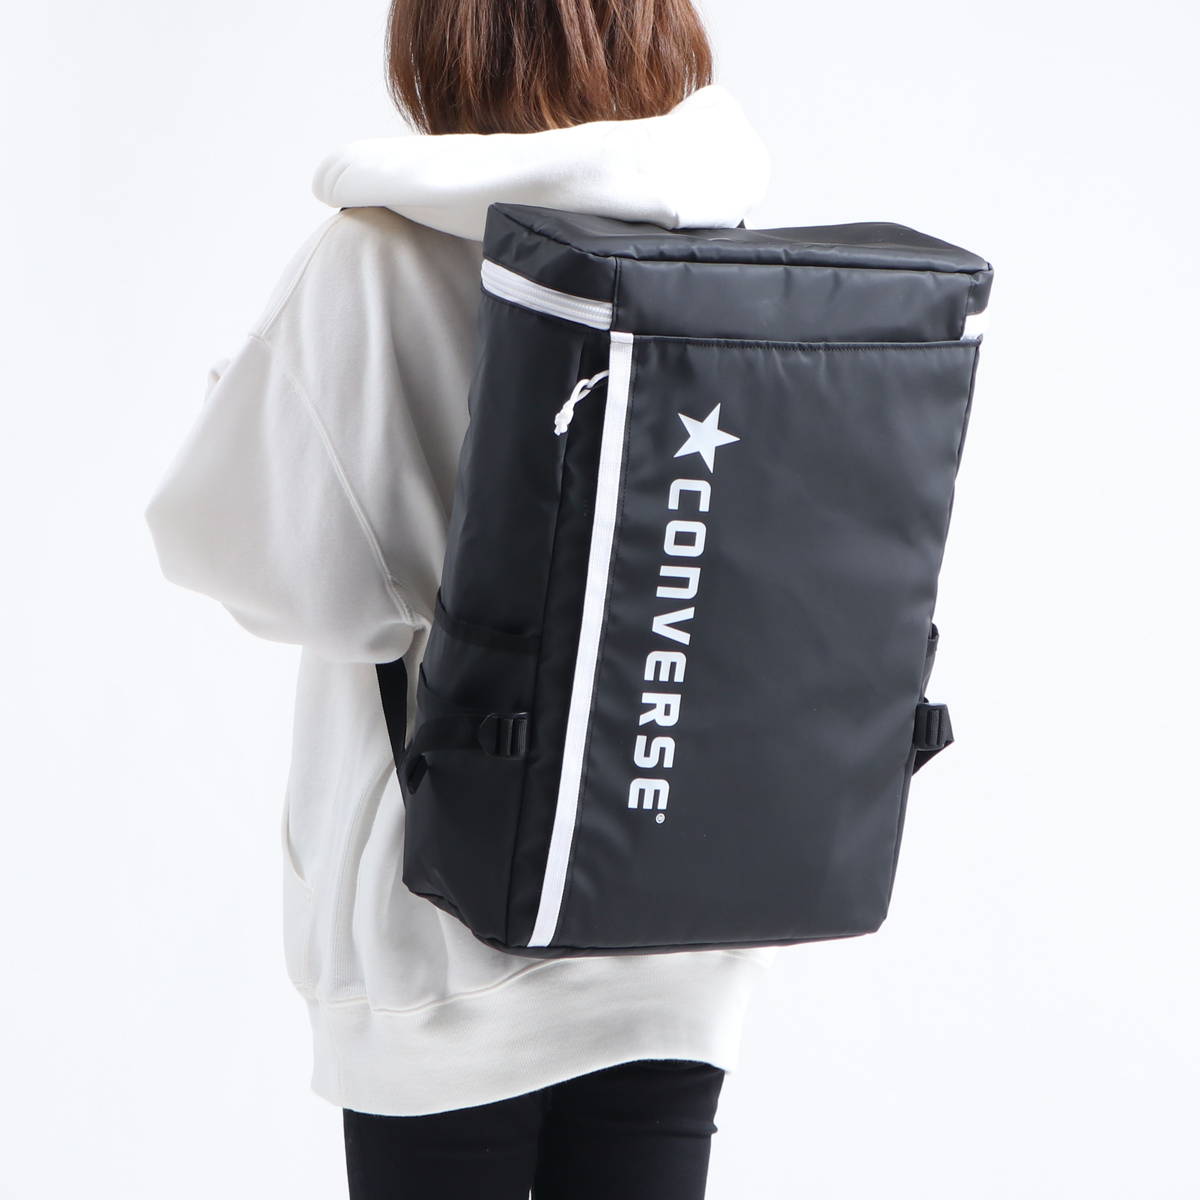 CONVERSE コンバース ONE BOX BACK PACK0 リュックサック 14615200